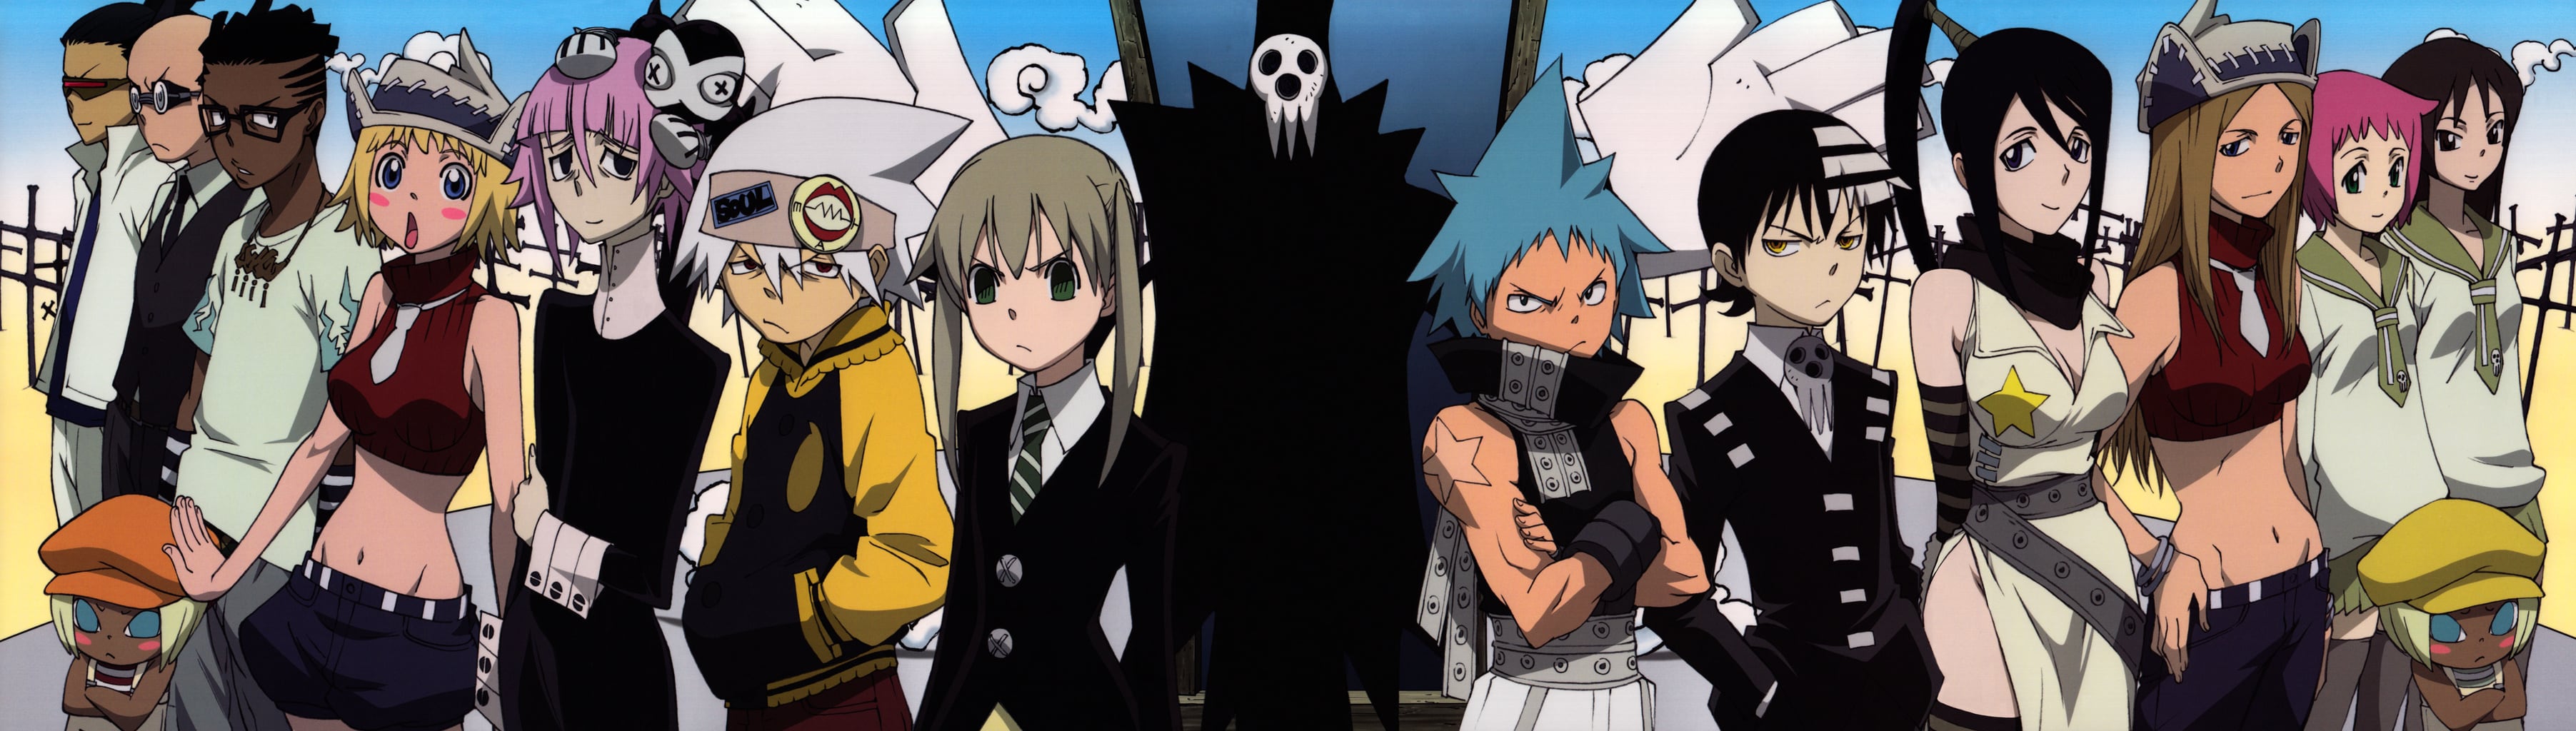 Ranking all Soul Eater Characters in Part 1 - YouTube